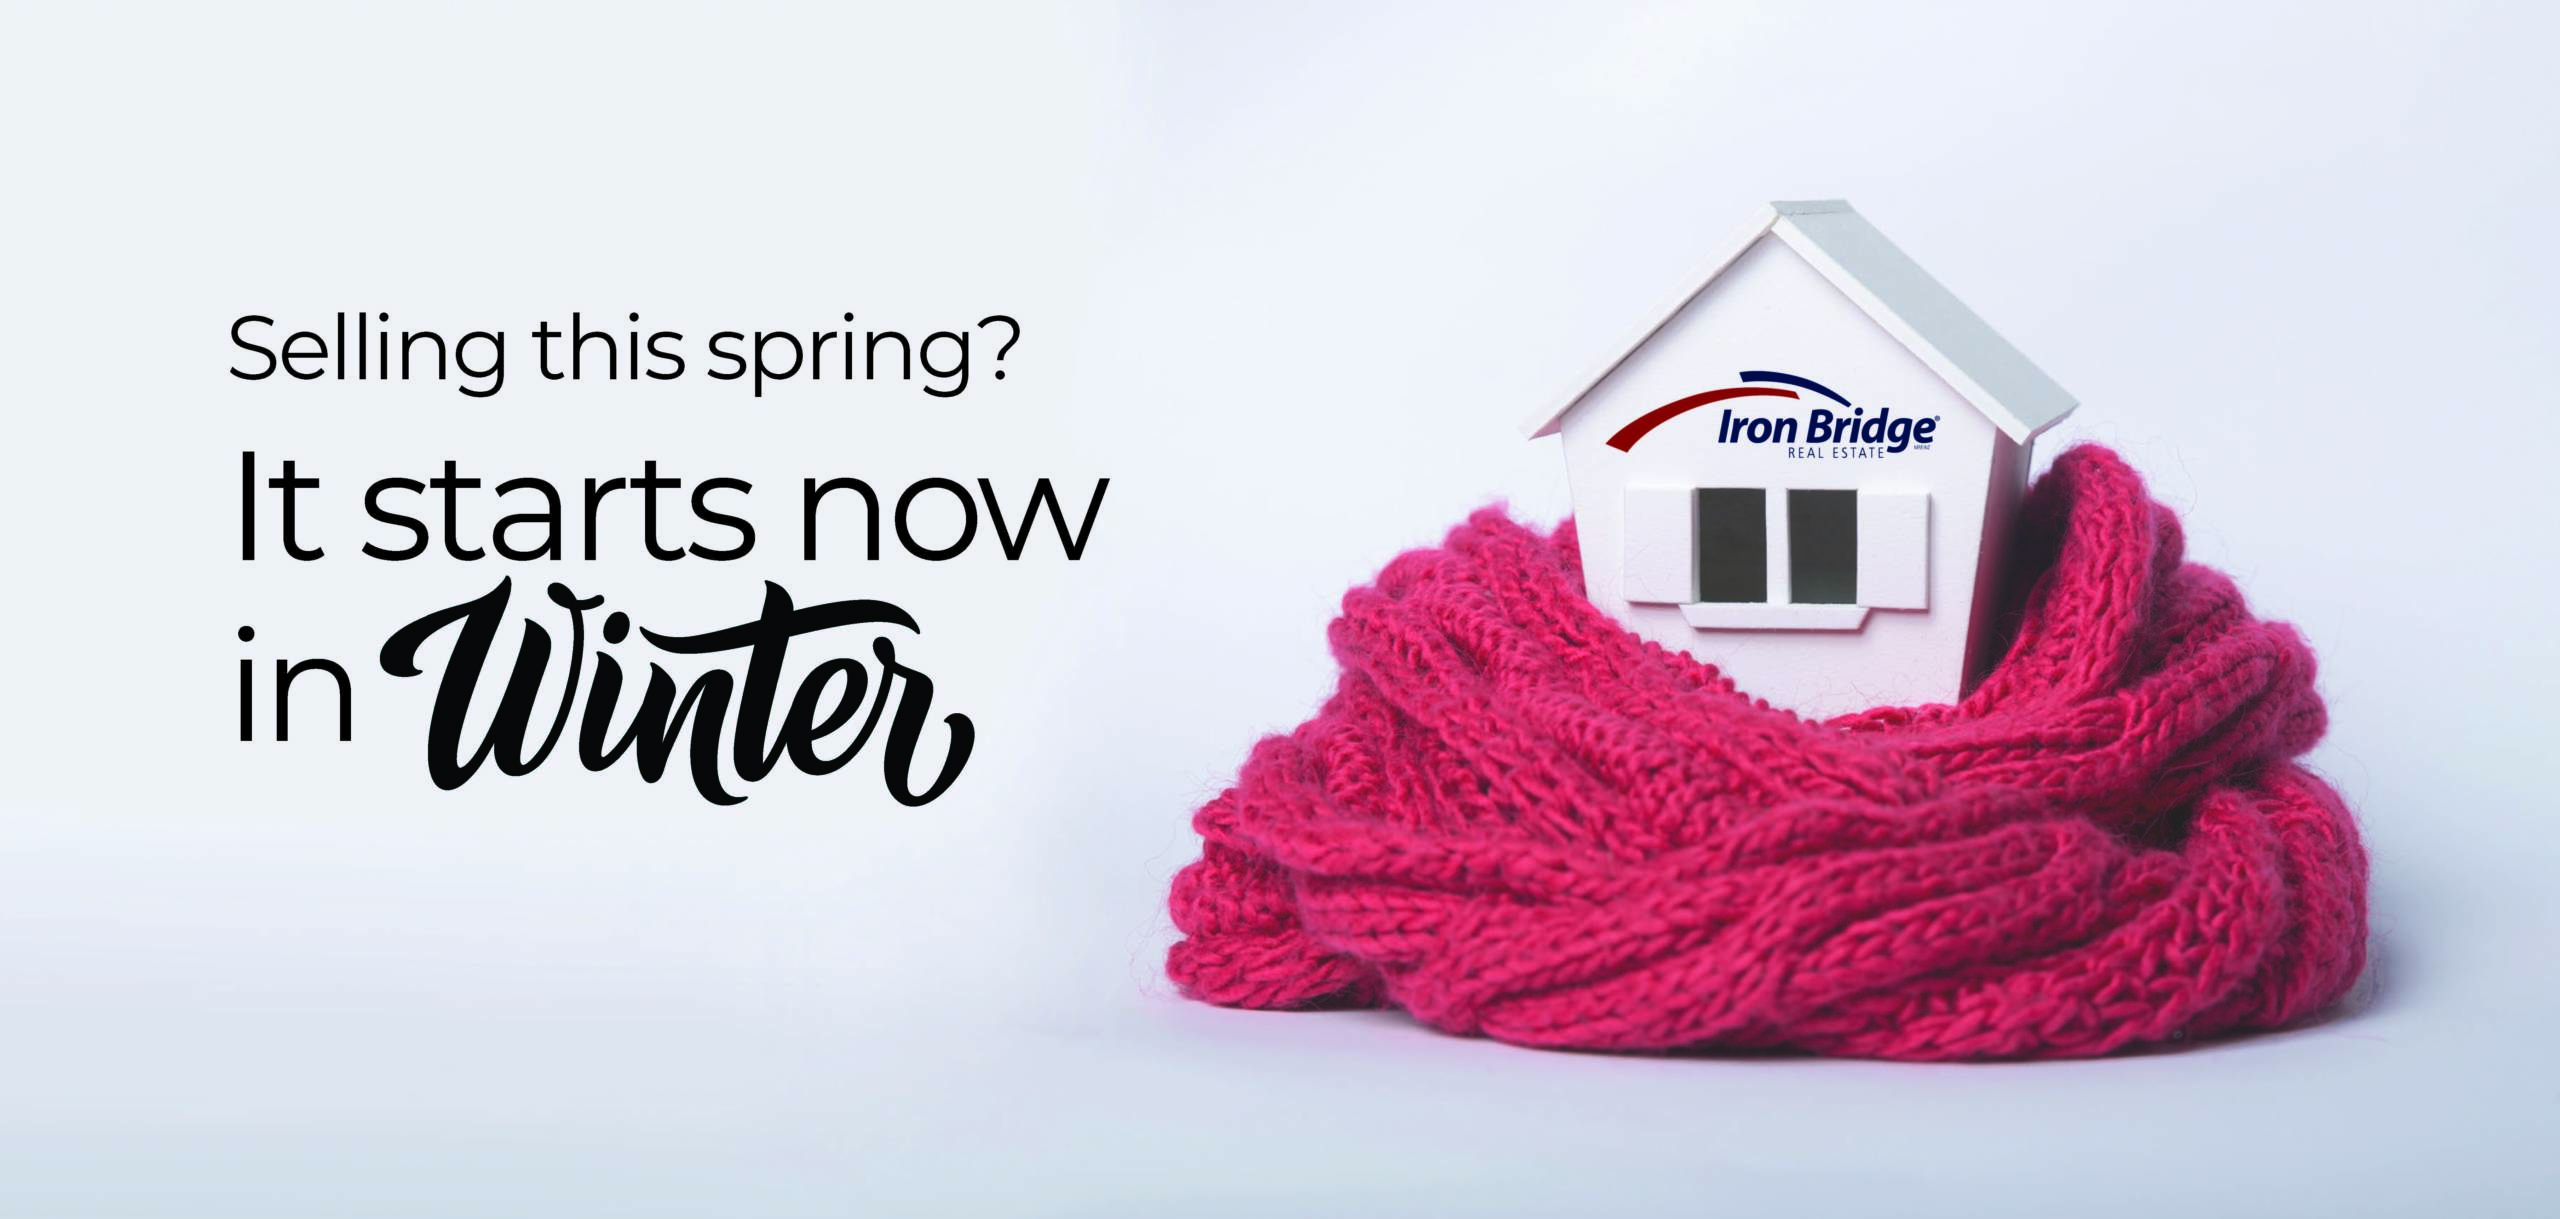 Start Planning Your Spring Sale Now: A Guide for Sellers